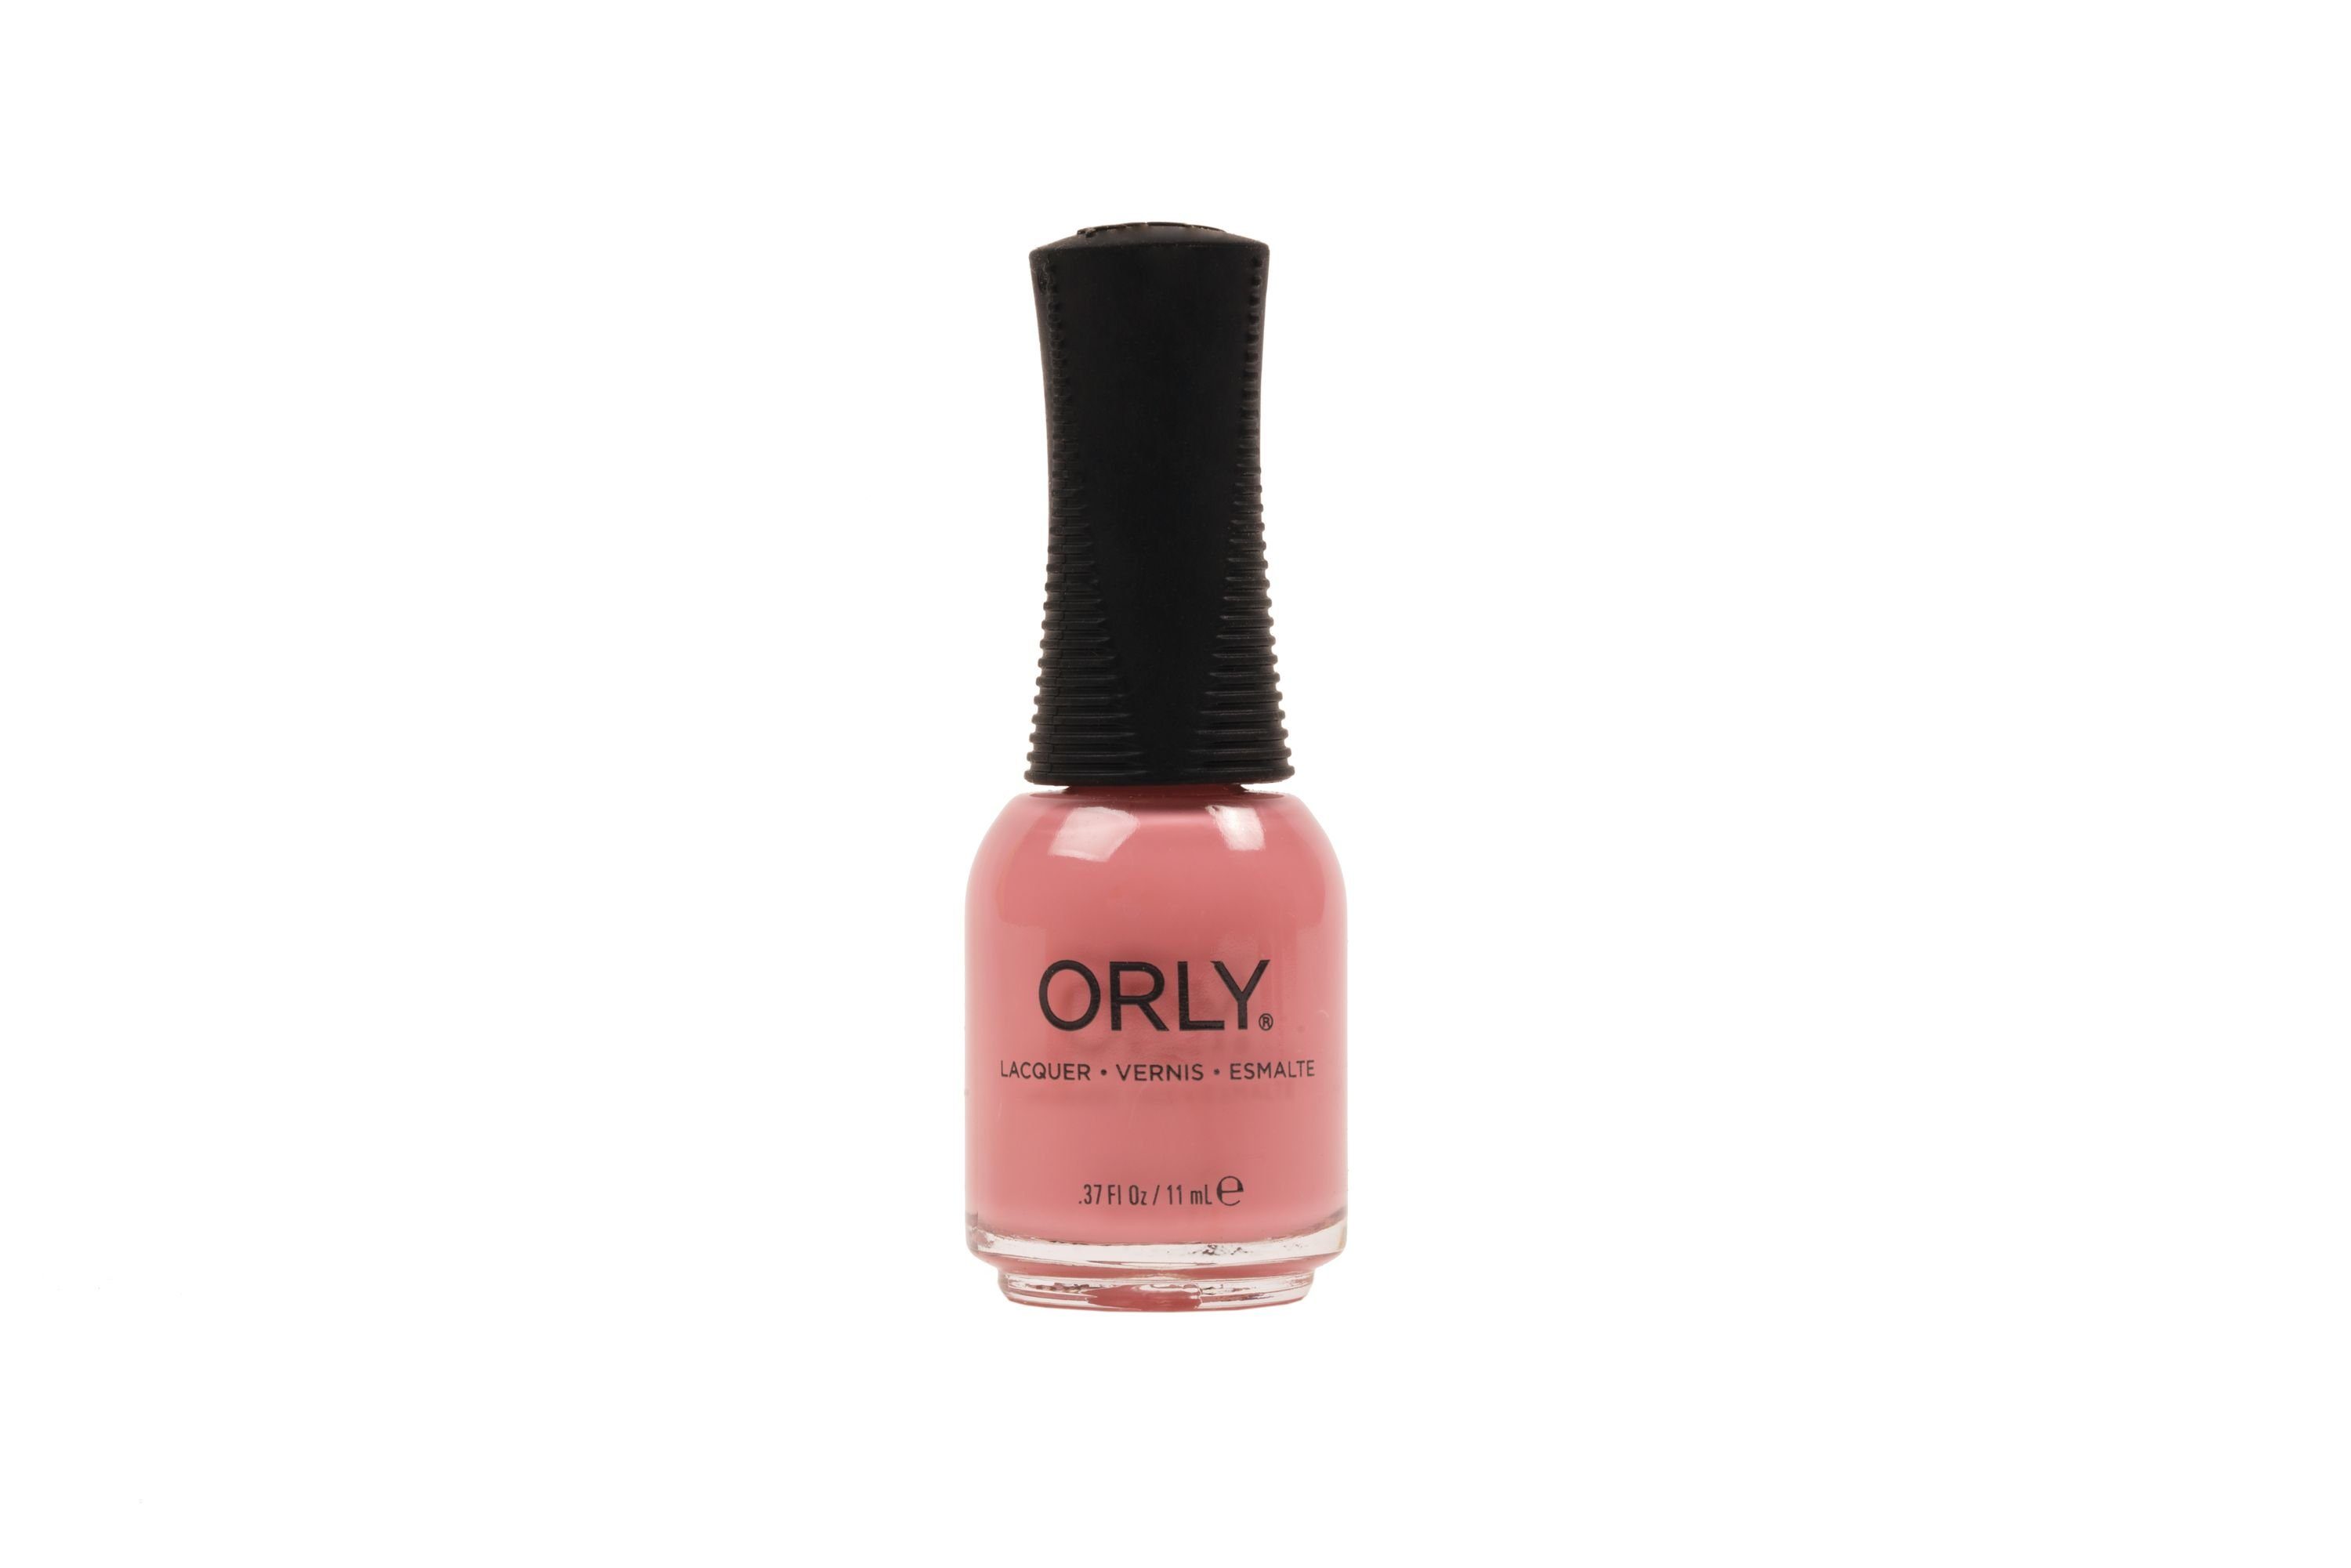 ORLY Nagellack ORLY UP COMING ml ROSES, 11